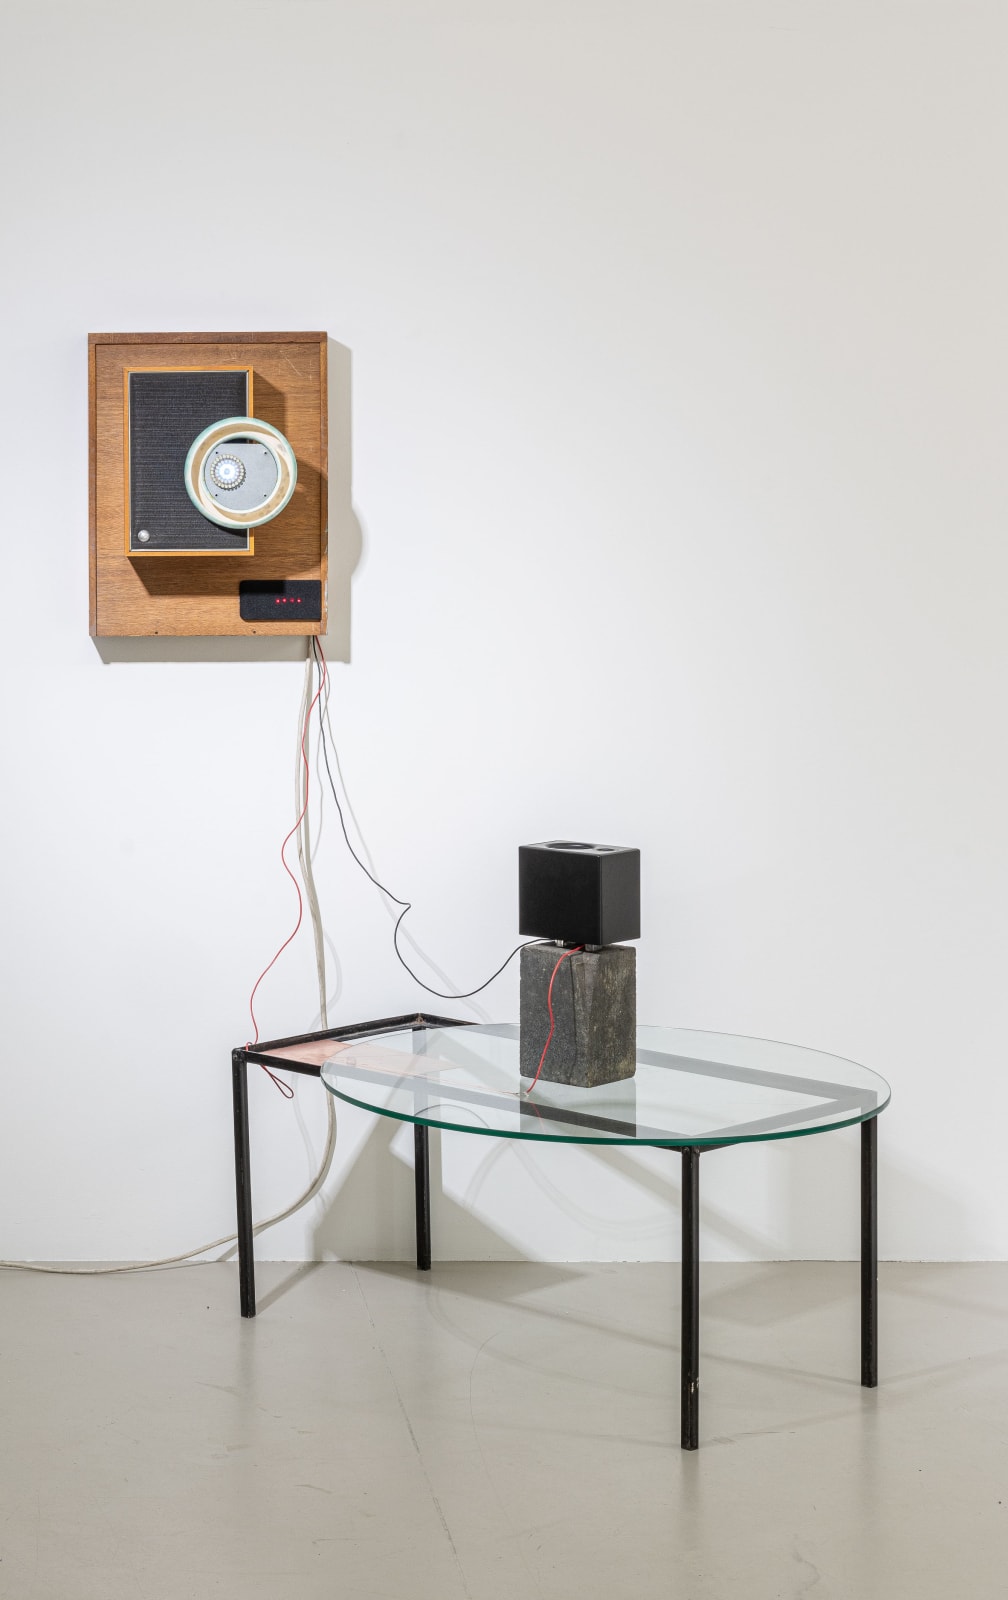 Haroon Mirza, Untitled Song #2, 2012